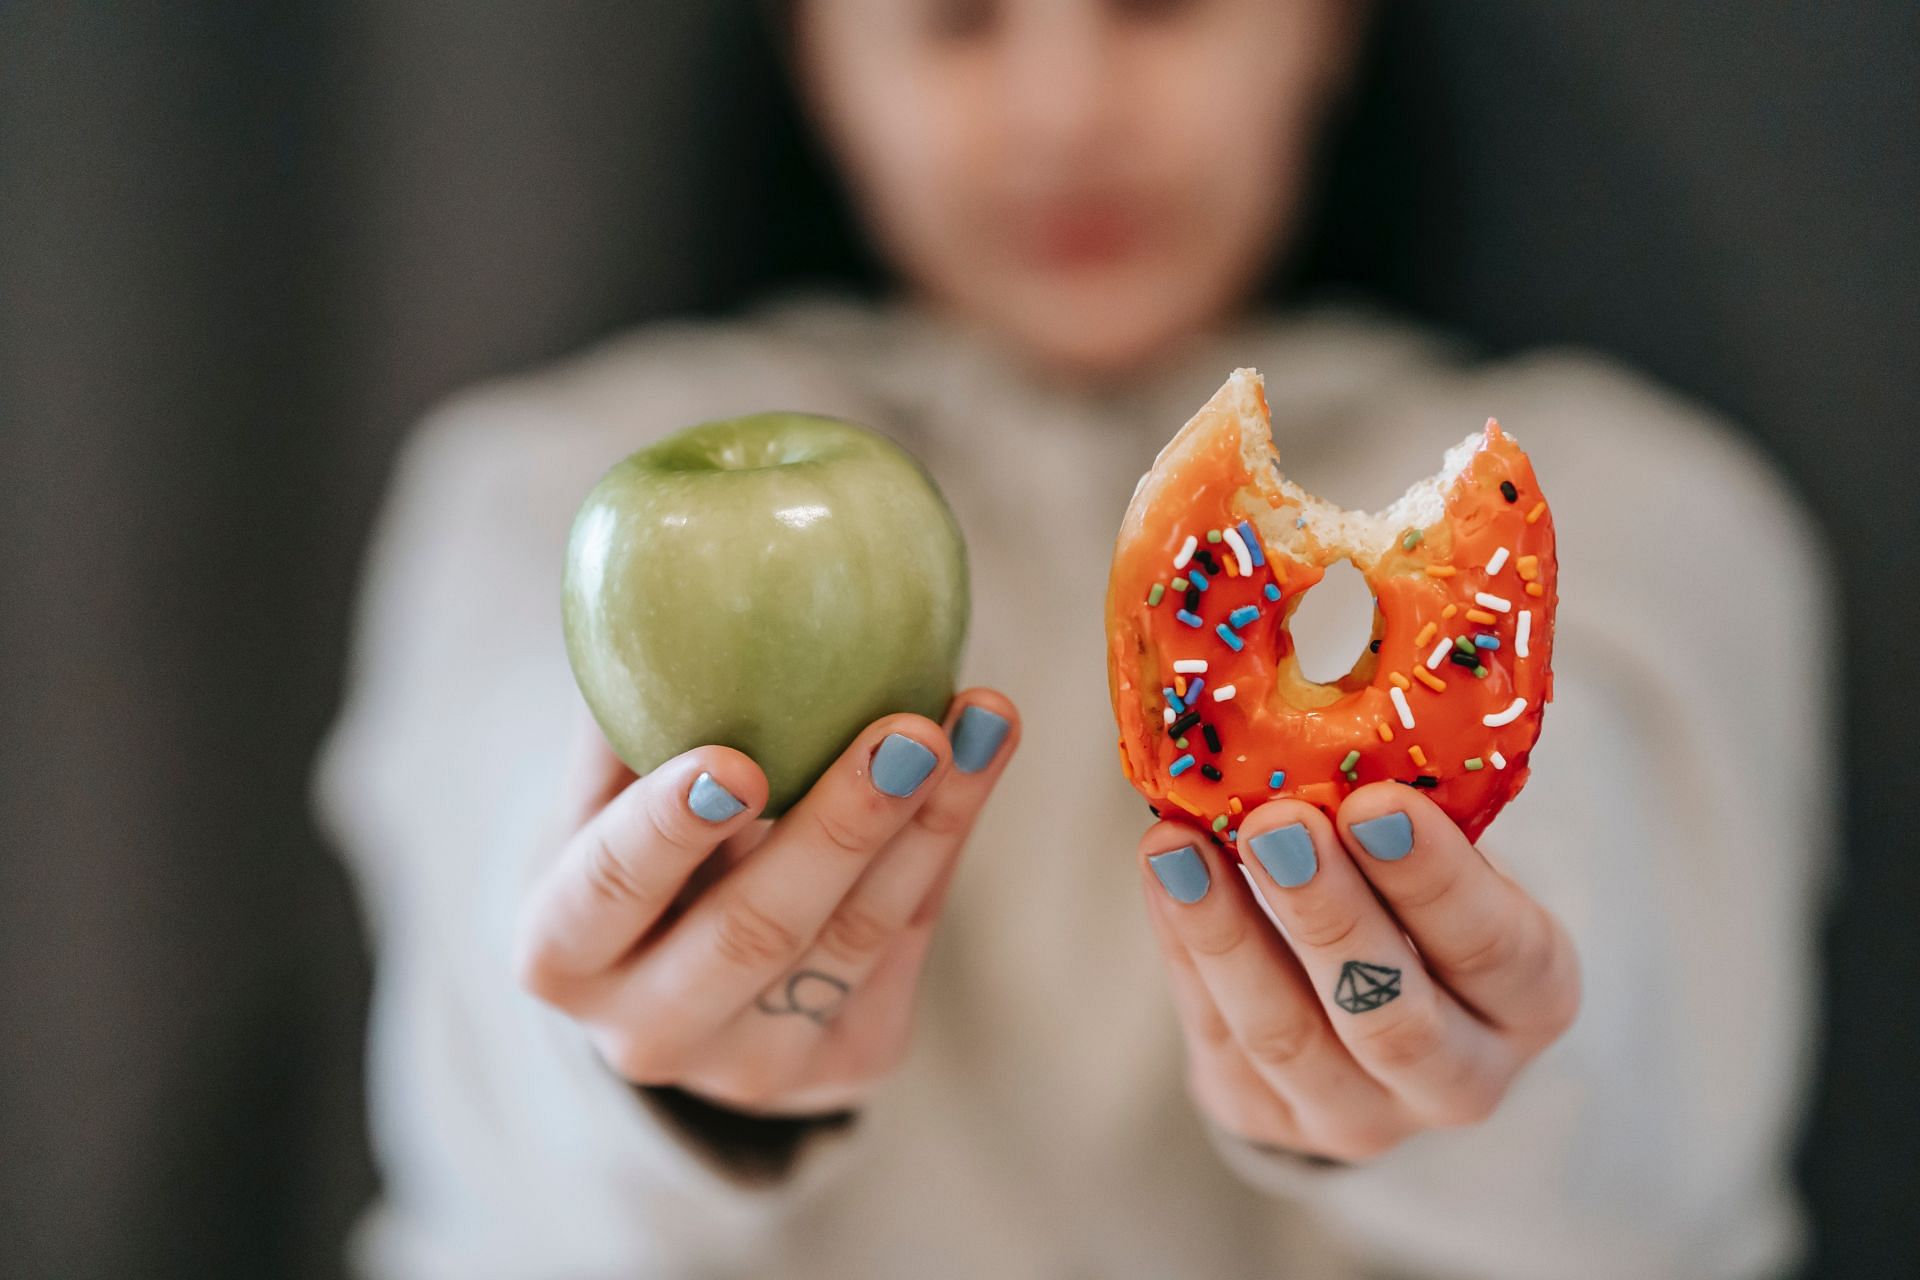 Although the doughnut will be more alluring, having a fresh fruit is better for you when undergoing menopause (Image via Pexels @Andres Ayrton)